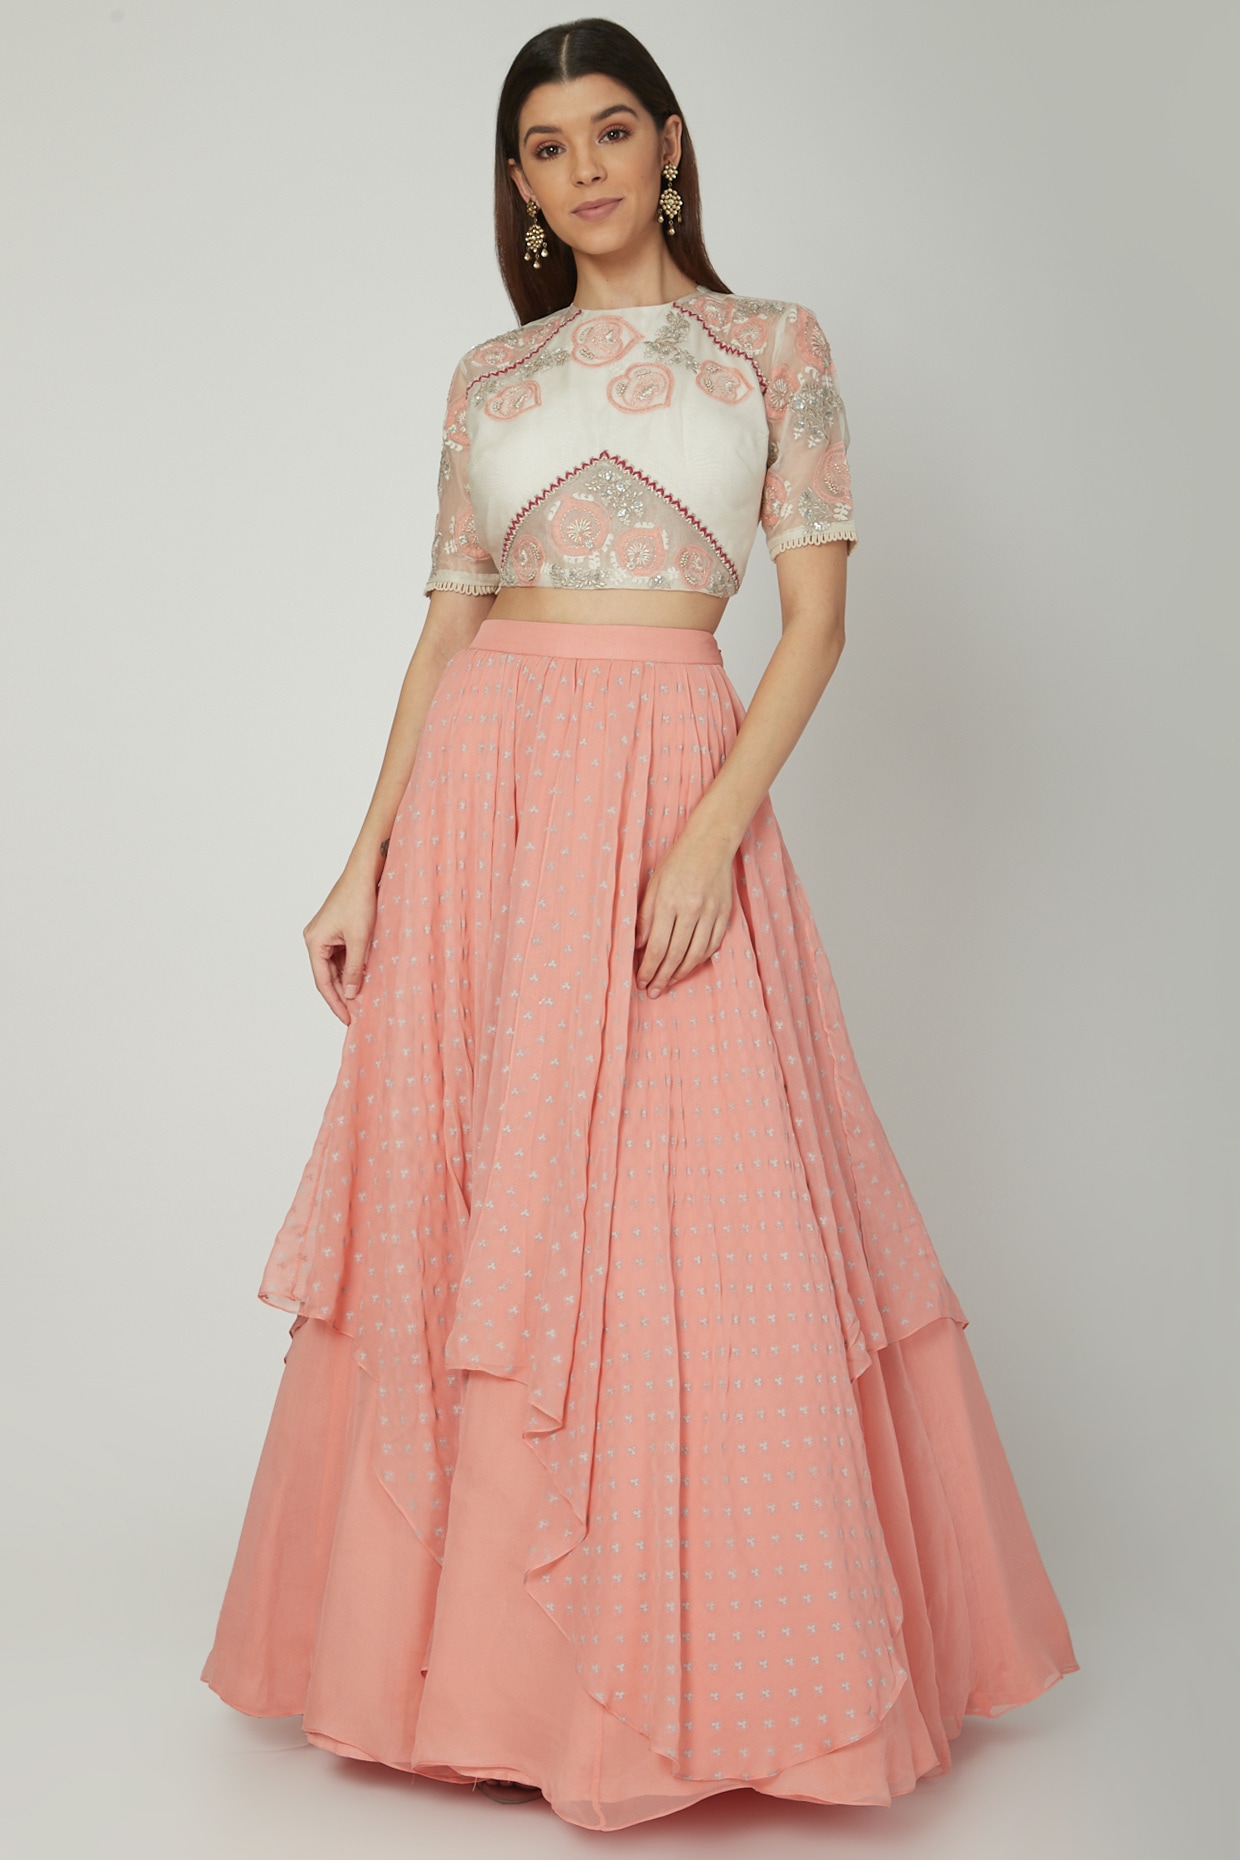 Exclusive Peach Color Embroidered Wedding Wear Lehenga Choli In Crepe